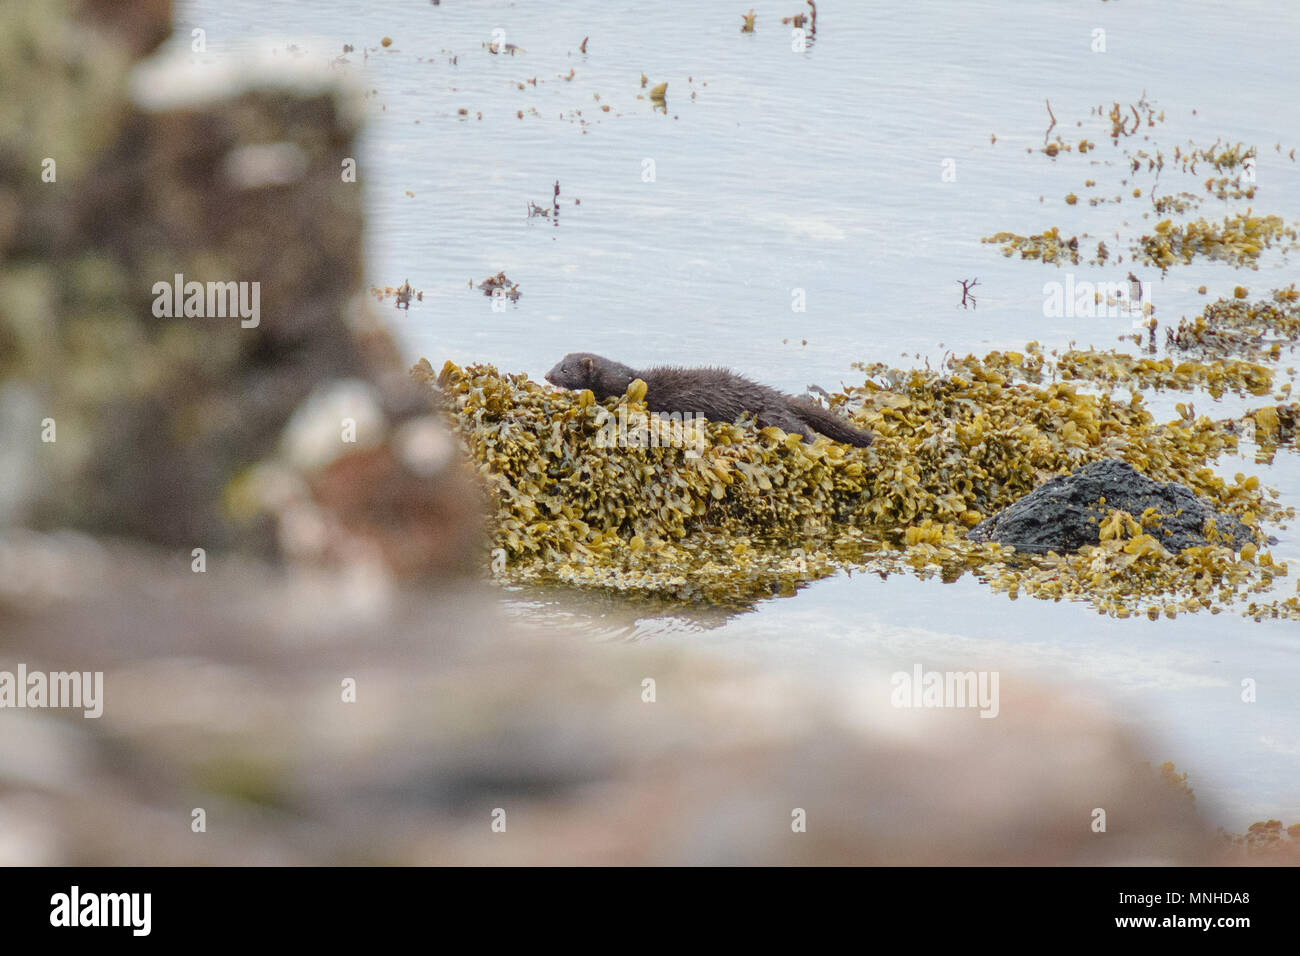 Isle of Mull, Scotland, UK. 17th may 2018. Despite ongoing attempts to control their numbers the non-native American mink continues to cause significant disturbance and losses to rare indigenous species on the island. The Isle of Mull has earned an enviable reputation as the premier wildlife tourism destination in the UK. It is believed that mink cause significant damage to populations of the ground-nesting shorebirds like this oyster catcher and other species through competition and predation. Credit: Rafael Garea-Balado/Alamy Live News Stock Photo